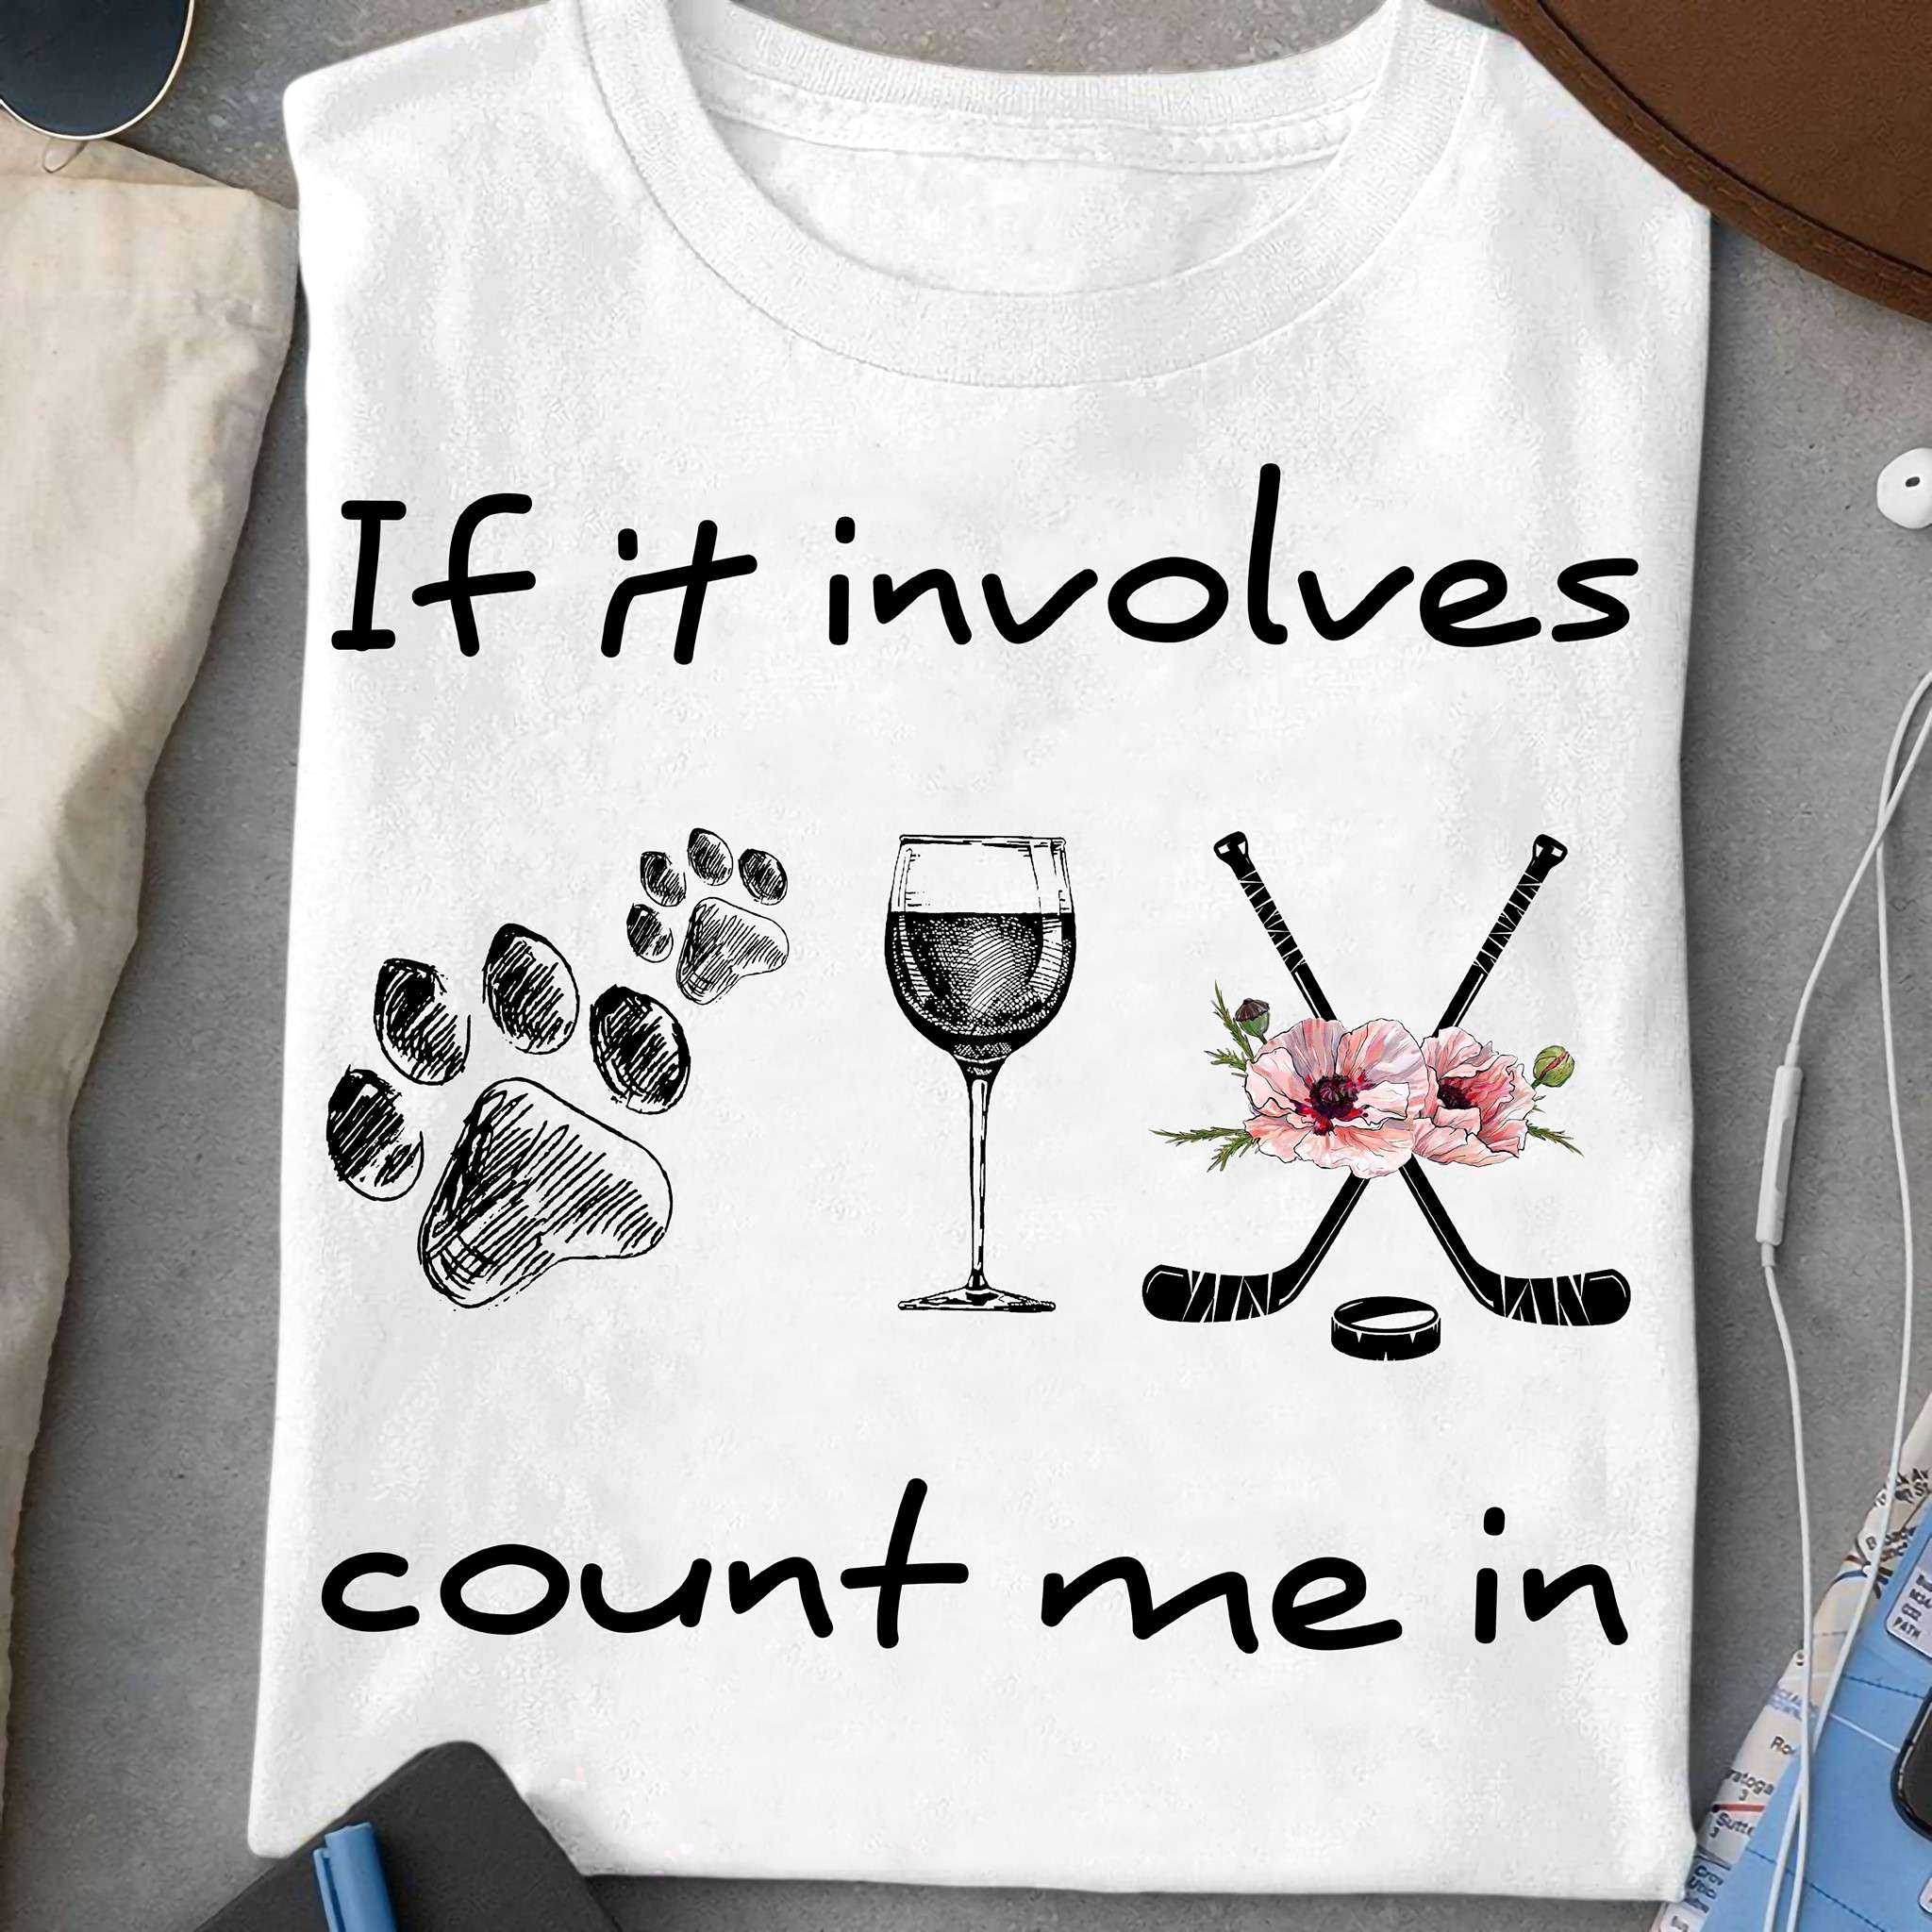 If it involves count me in - Dog wine and hockey, dog footprint, hockey the sport